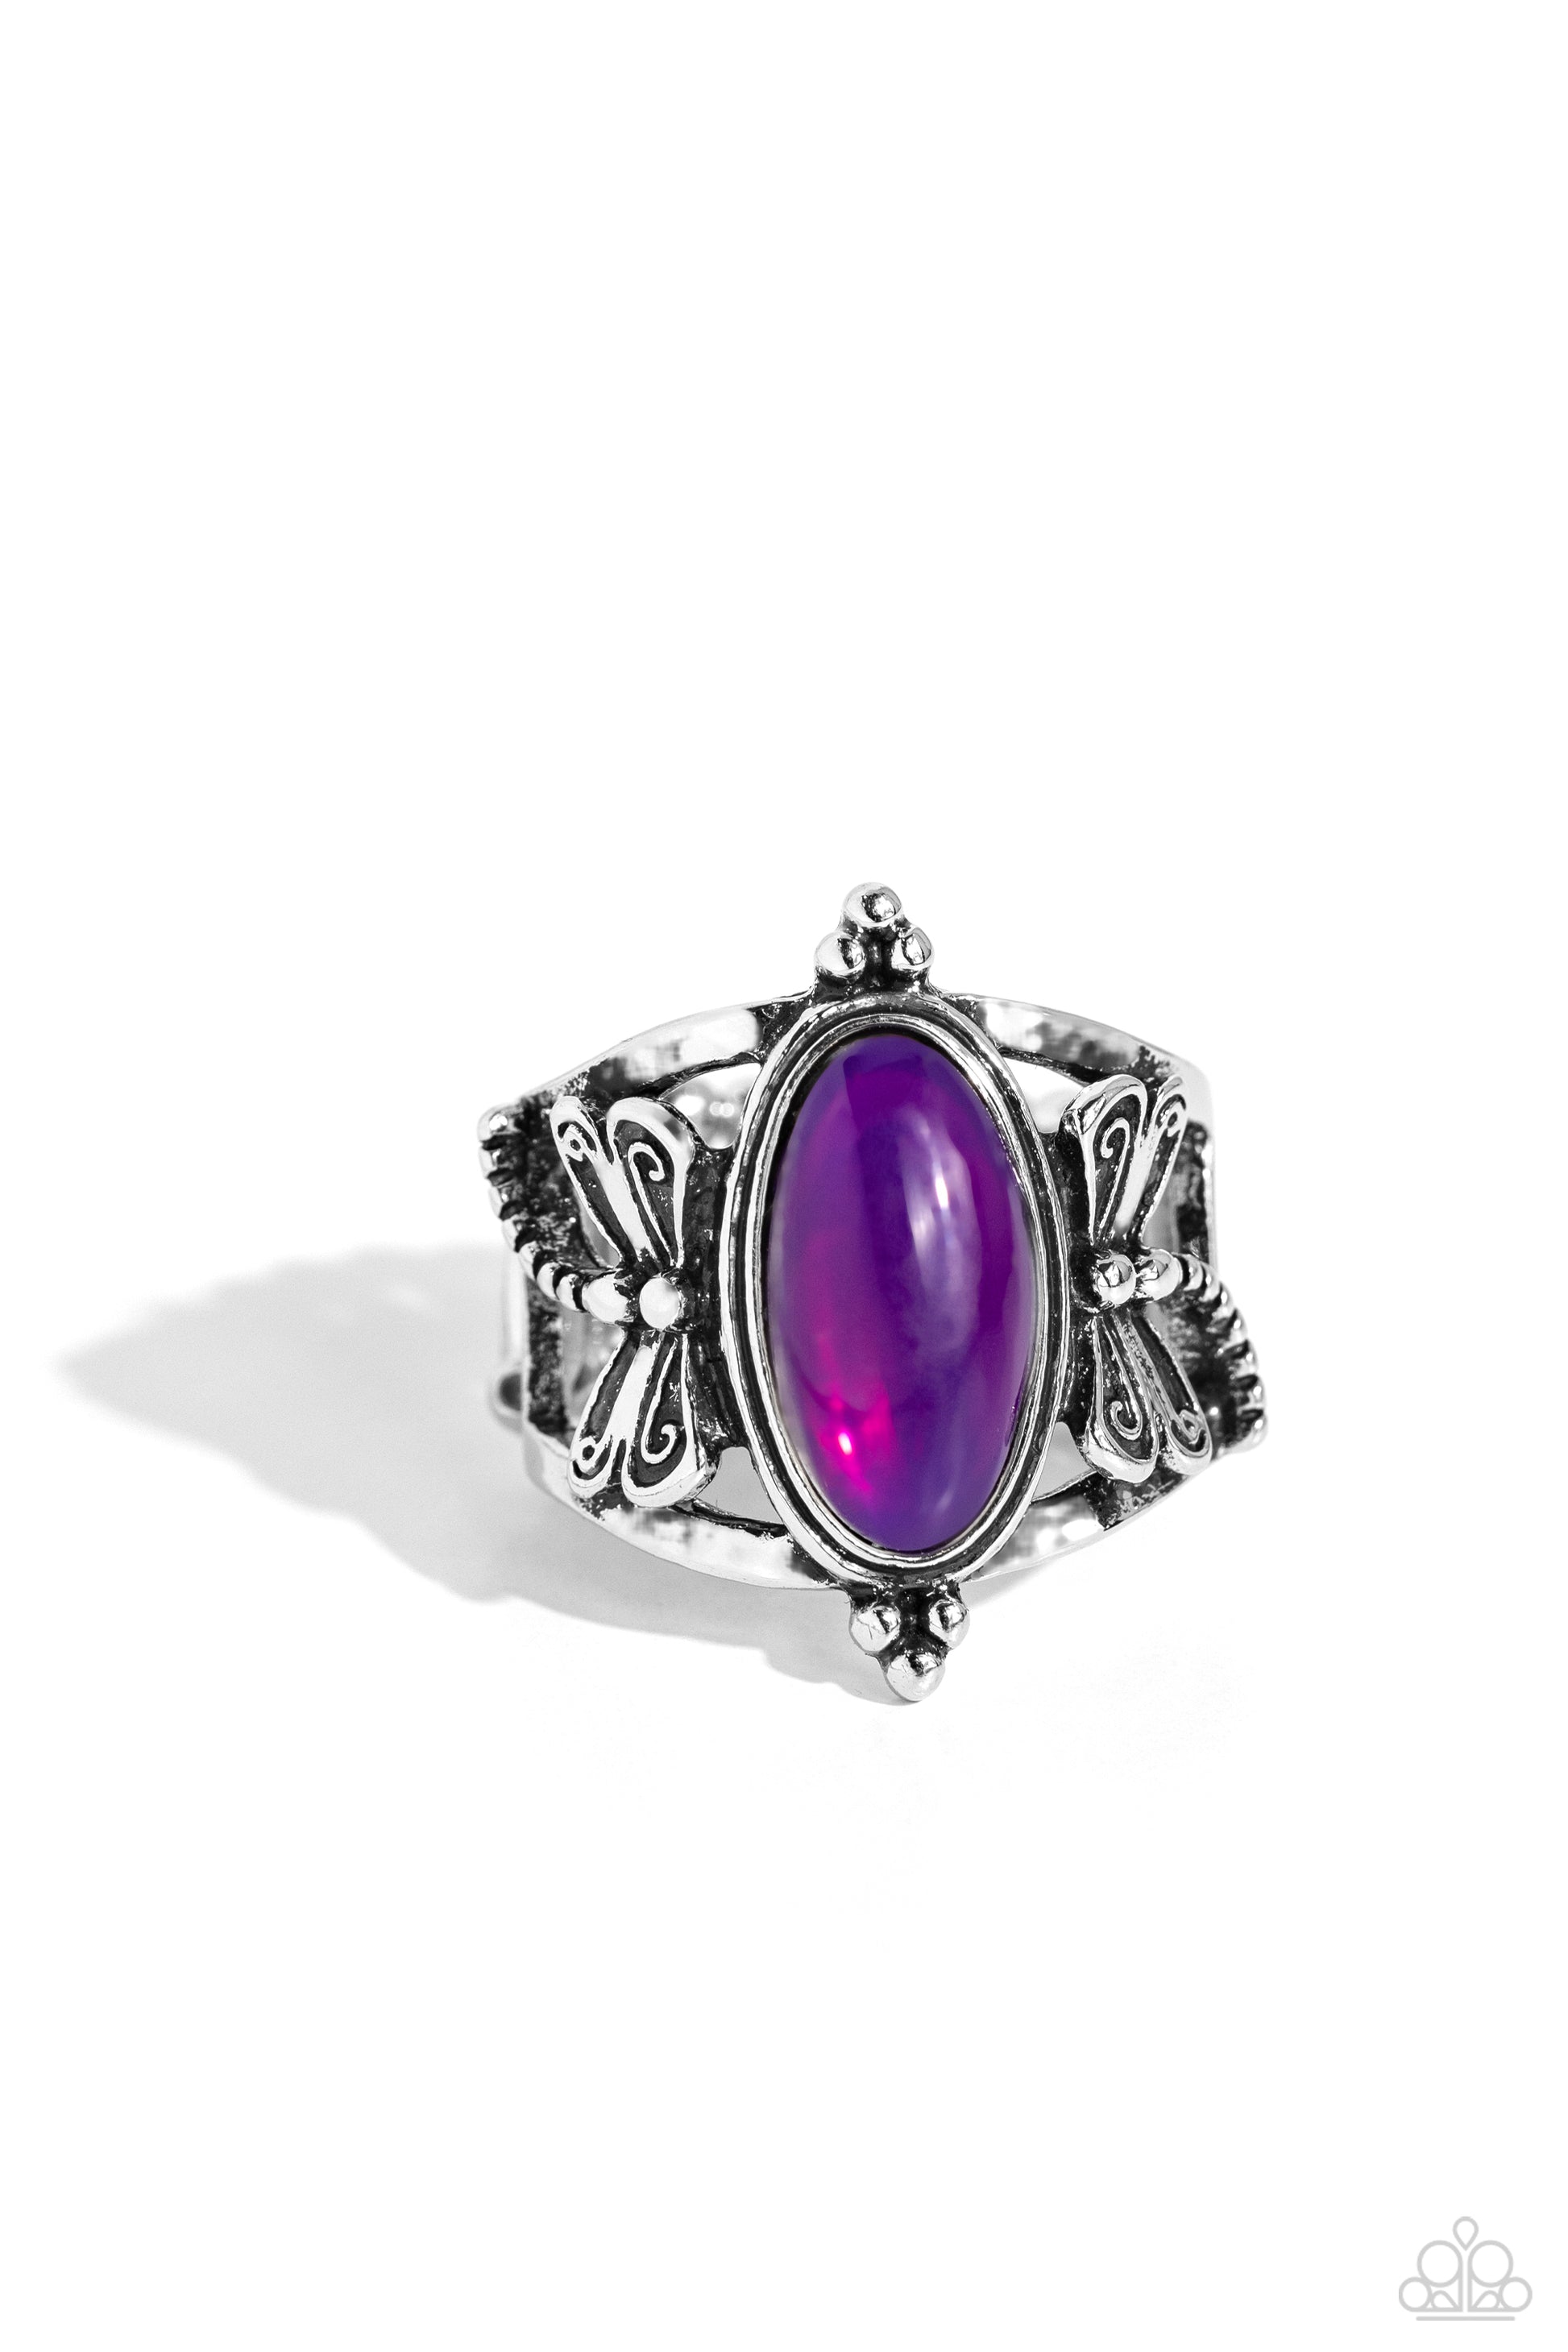 Dance of the Dragonflies - purple - Paparazzi ring